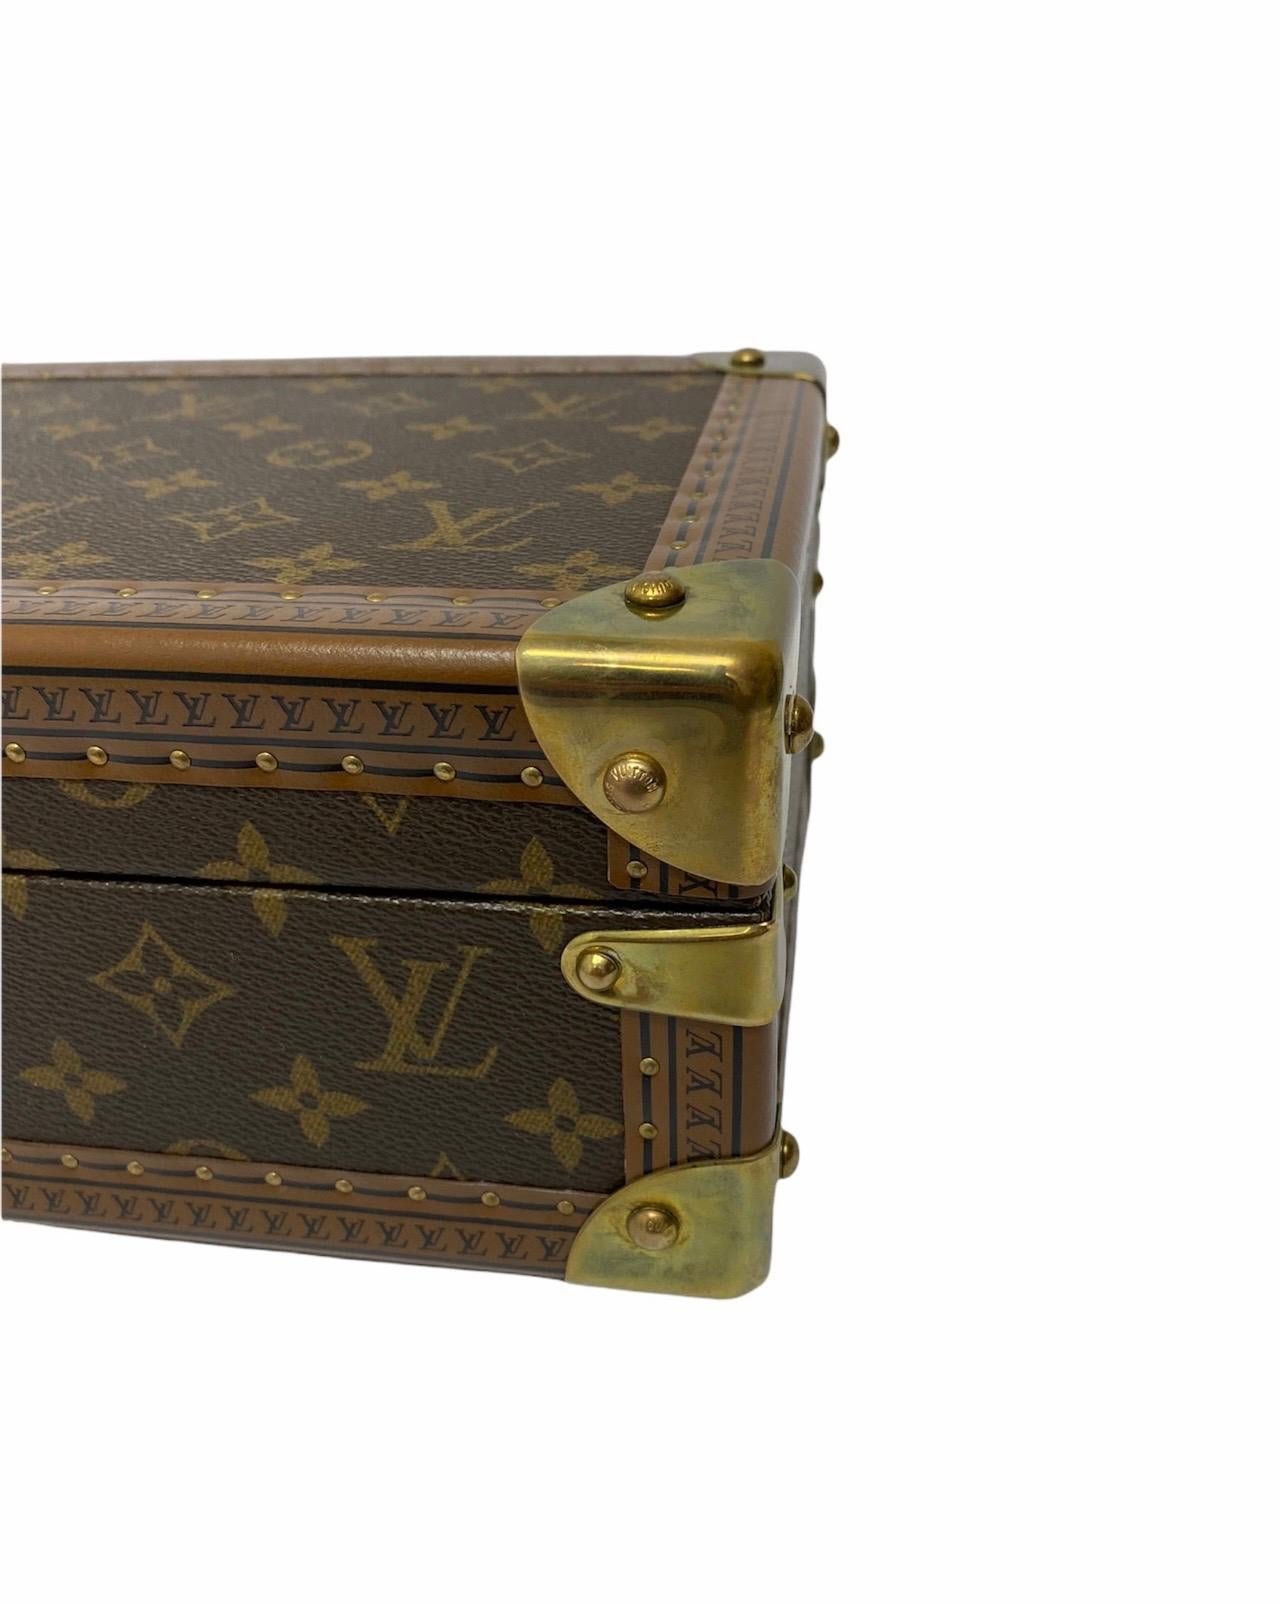 Louis Vuitton watch case made of Monogram canvas, natural cowhide finishes, microfiber lining. It features studded reinforced leather trims and golden brass corners.

The box for 8 watches can be easily stored in the safe or suitcase and includes a